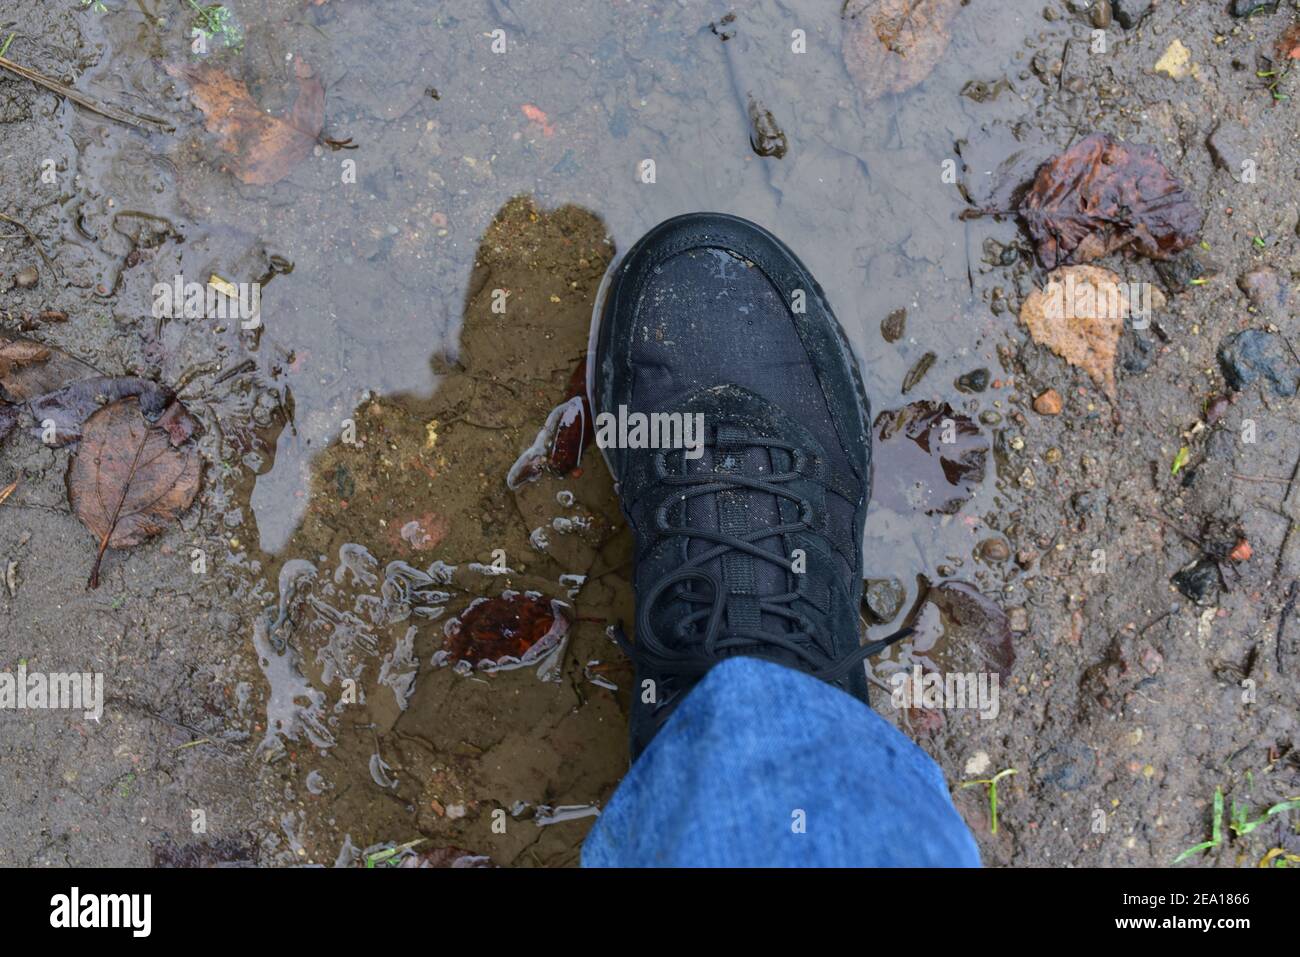 Water splash from shoes. Men's feet in hiking shoes steps into a puddle. Rain footwear for man or woman. Trekker boots for for cold and weather hike. Stock Photo